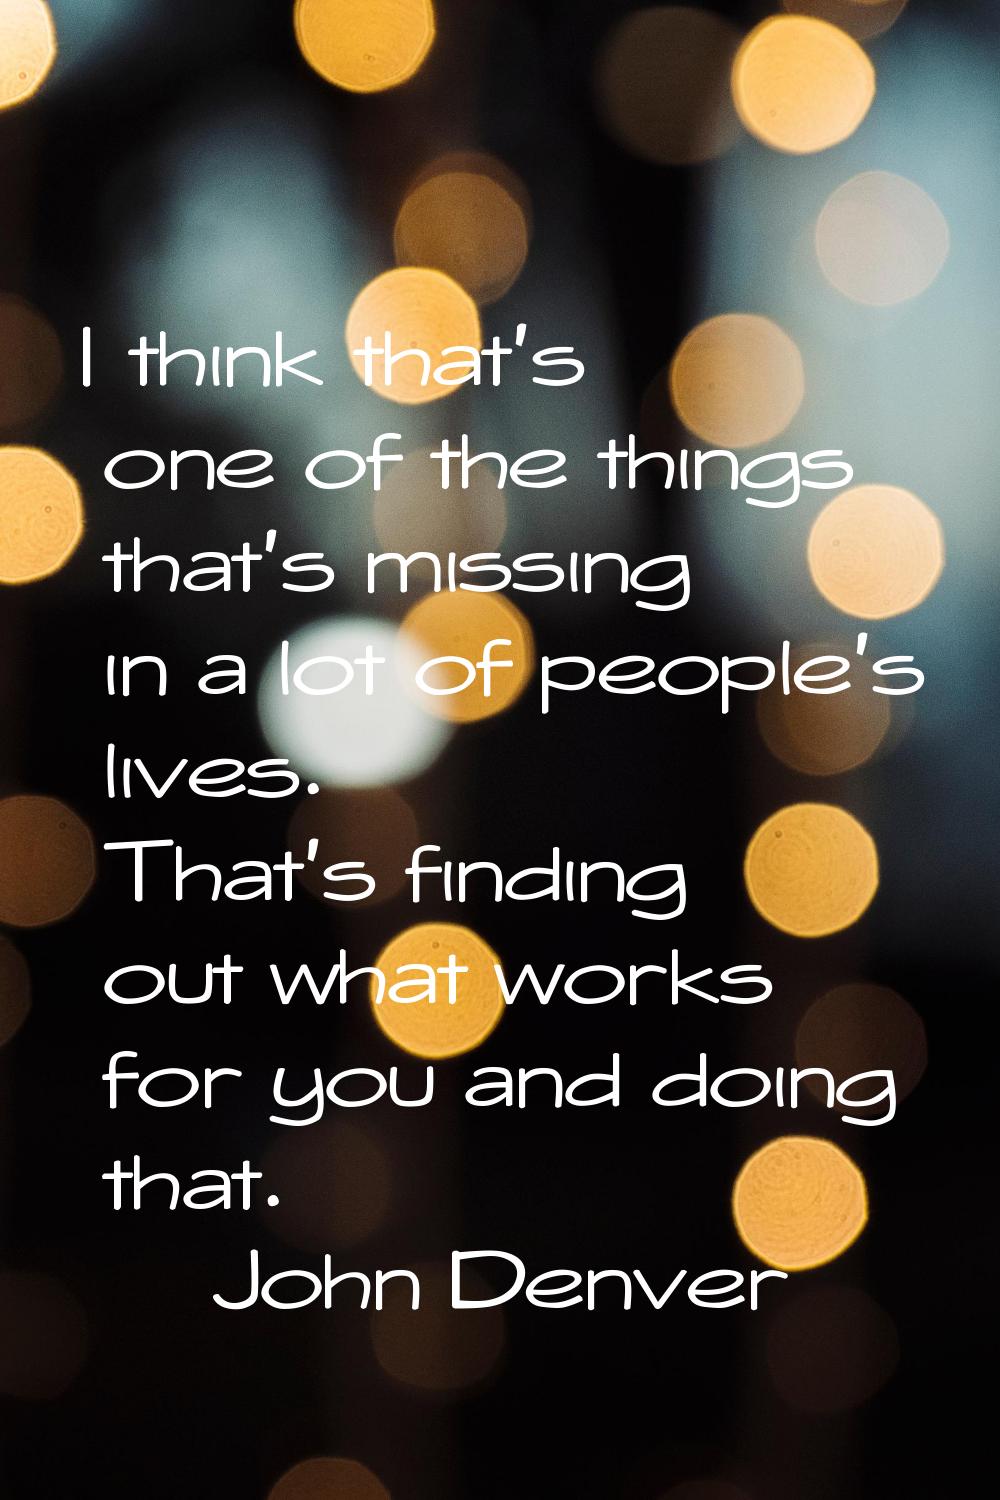 I think that's one of the things that's missing in a lot of people's lives. That's finding out what